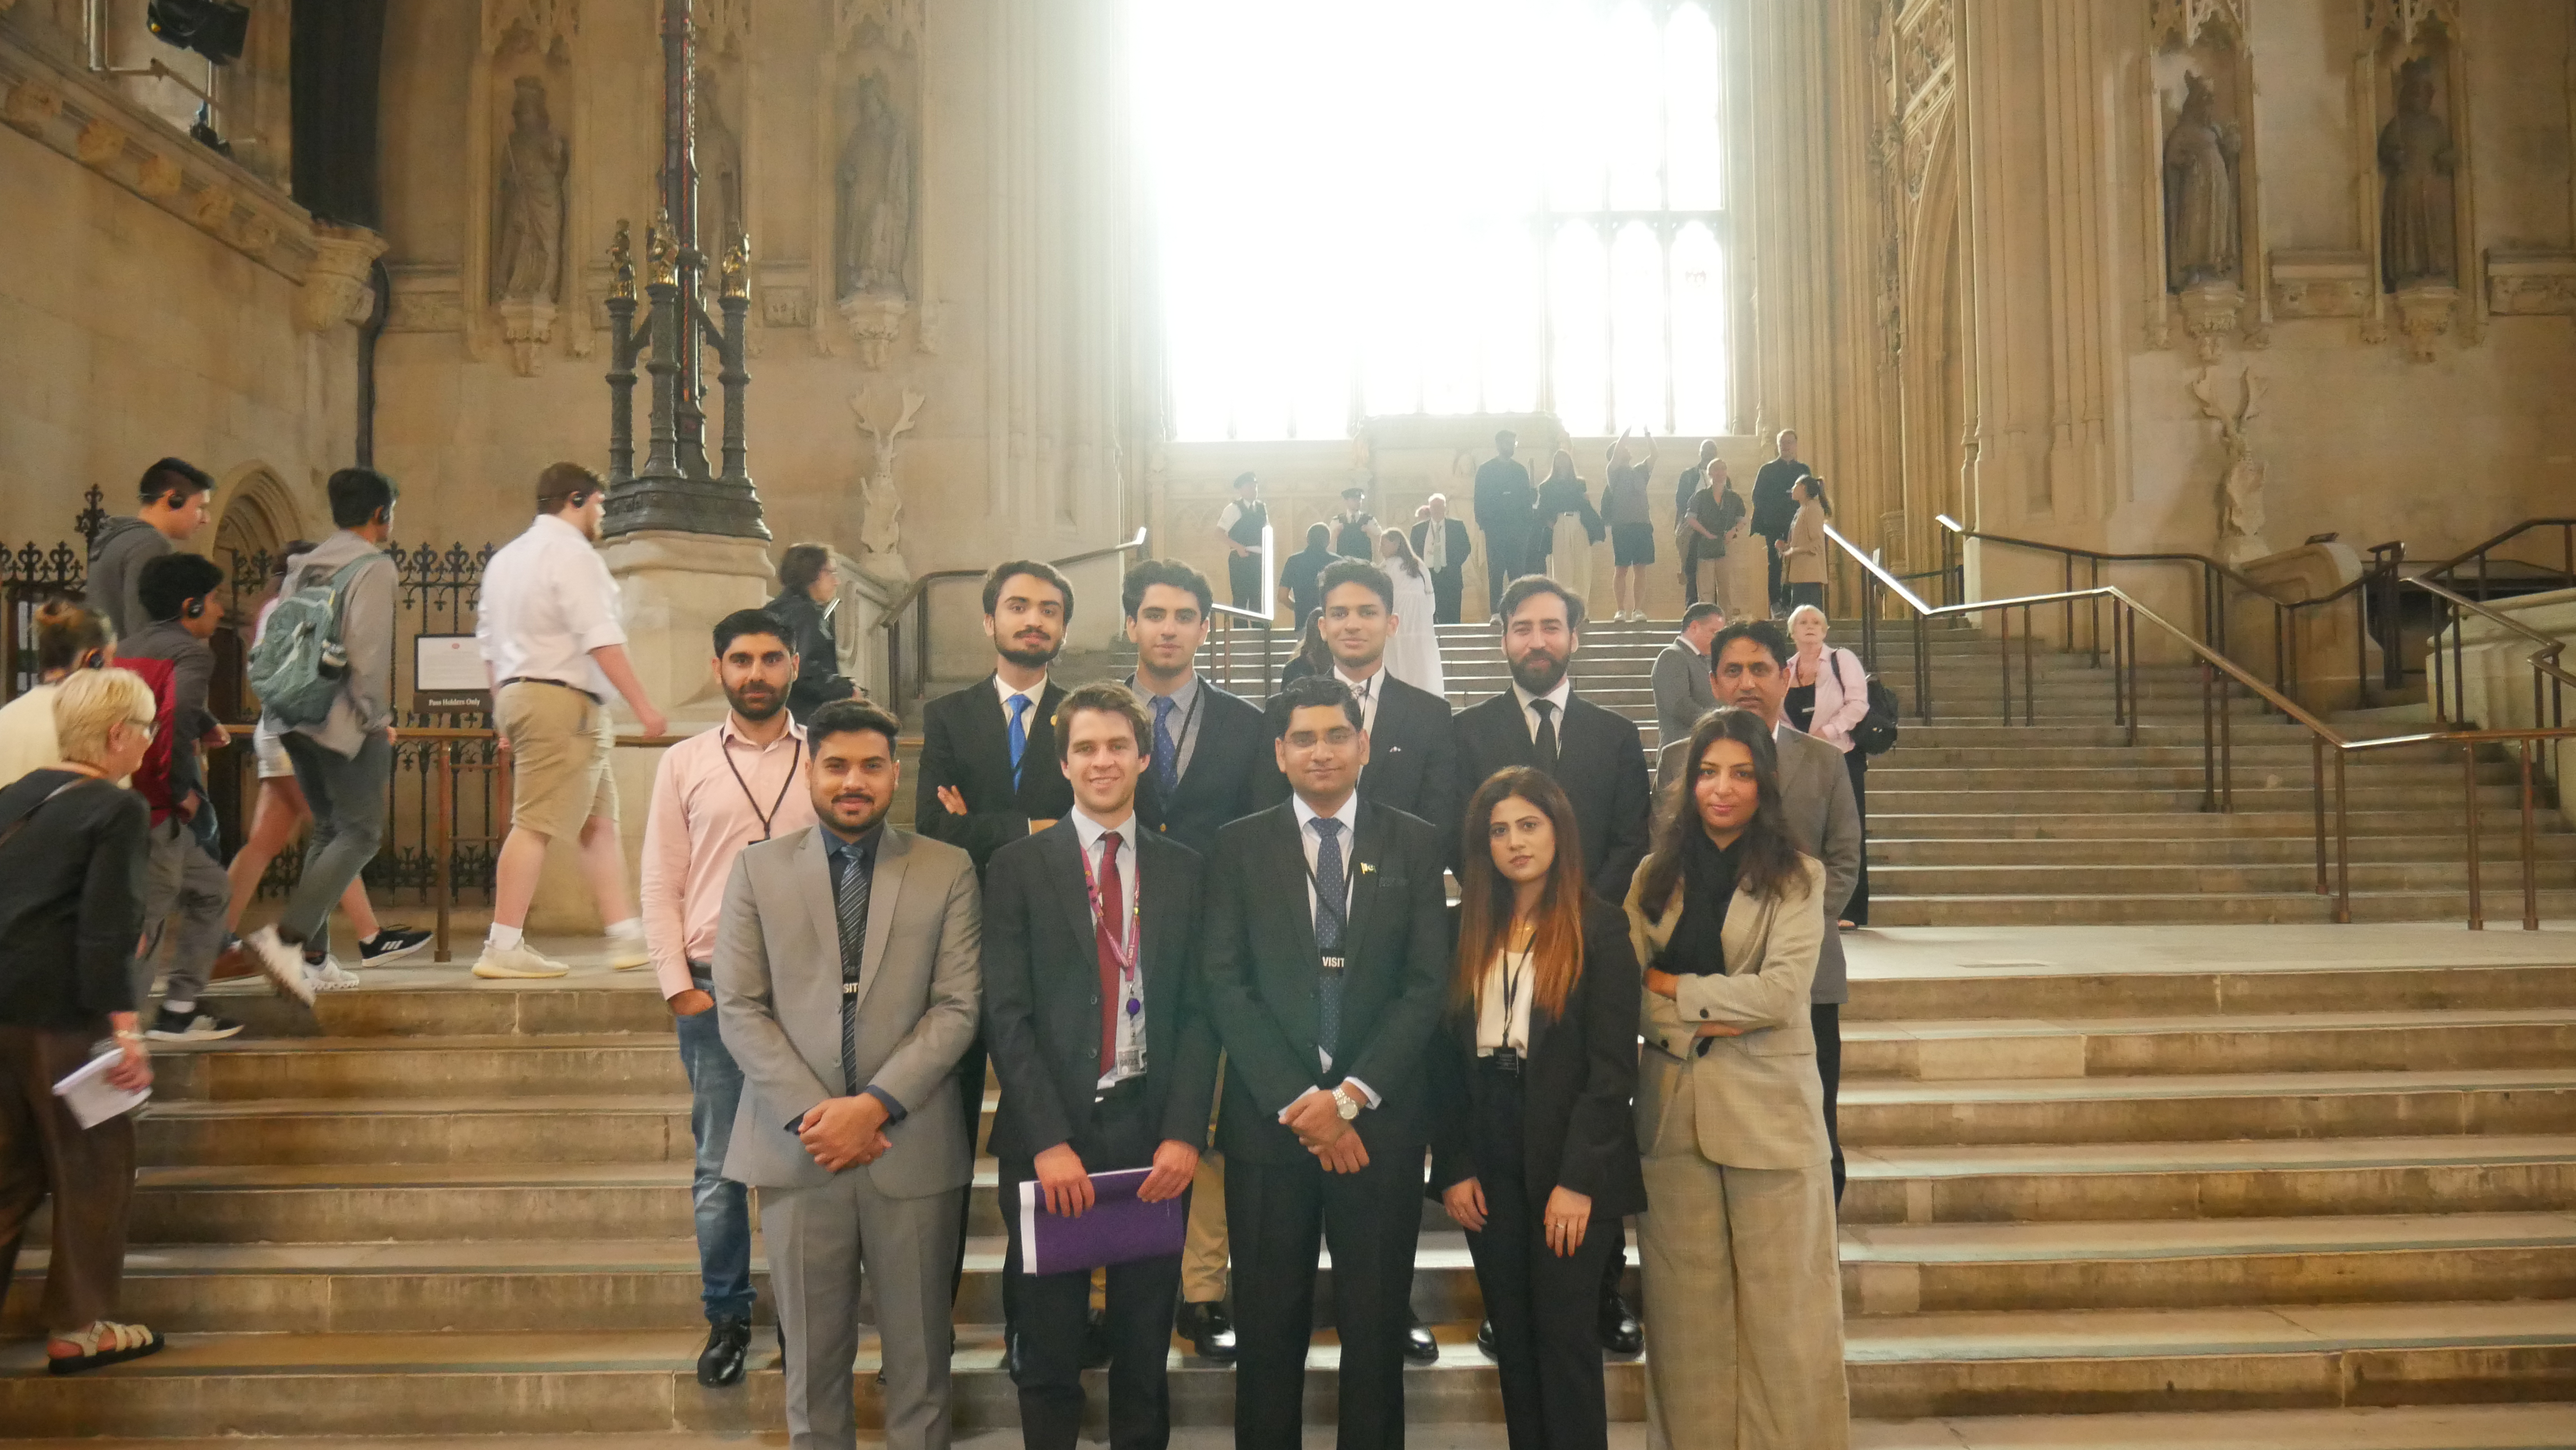 The delegation in Westminster Hall